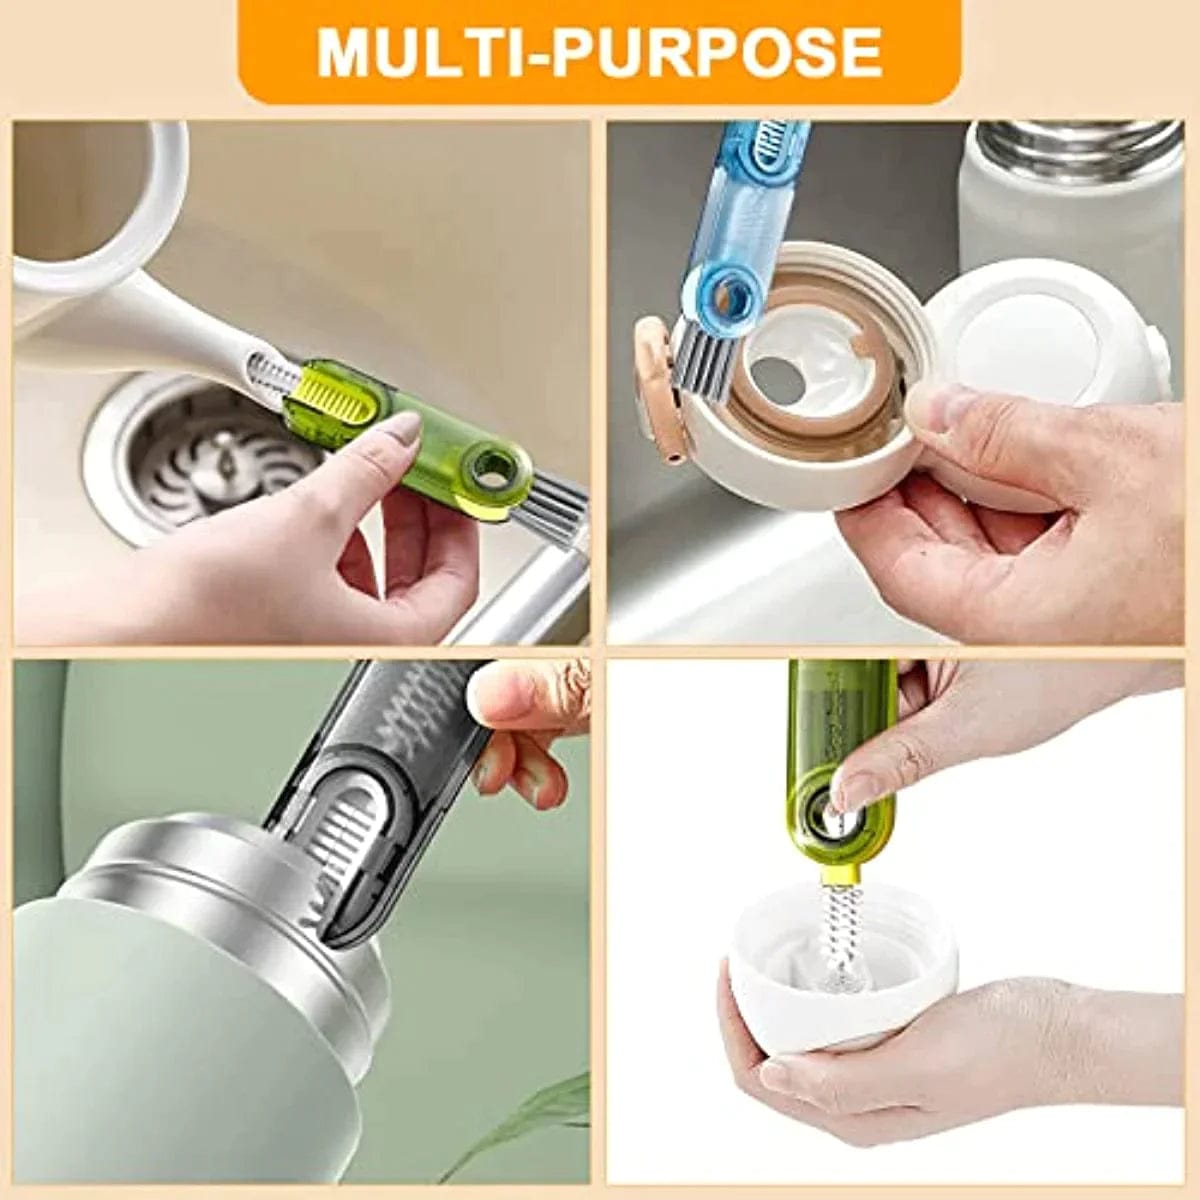 3 In 1 Tiny Bottle Cup Cover Brush Straw Cleaner Tools Multi-Functional Crevice  Cleaning Brush Kitchen Tools Gadgets - CJdropshipping